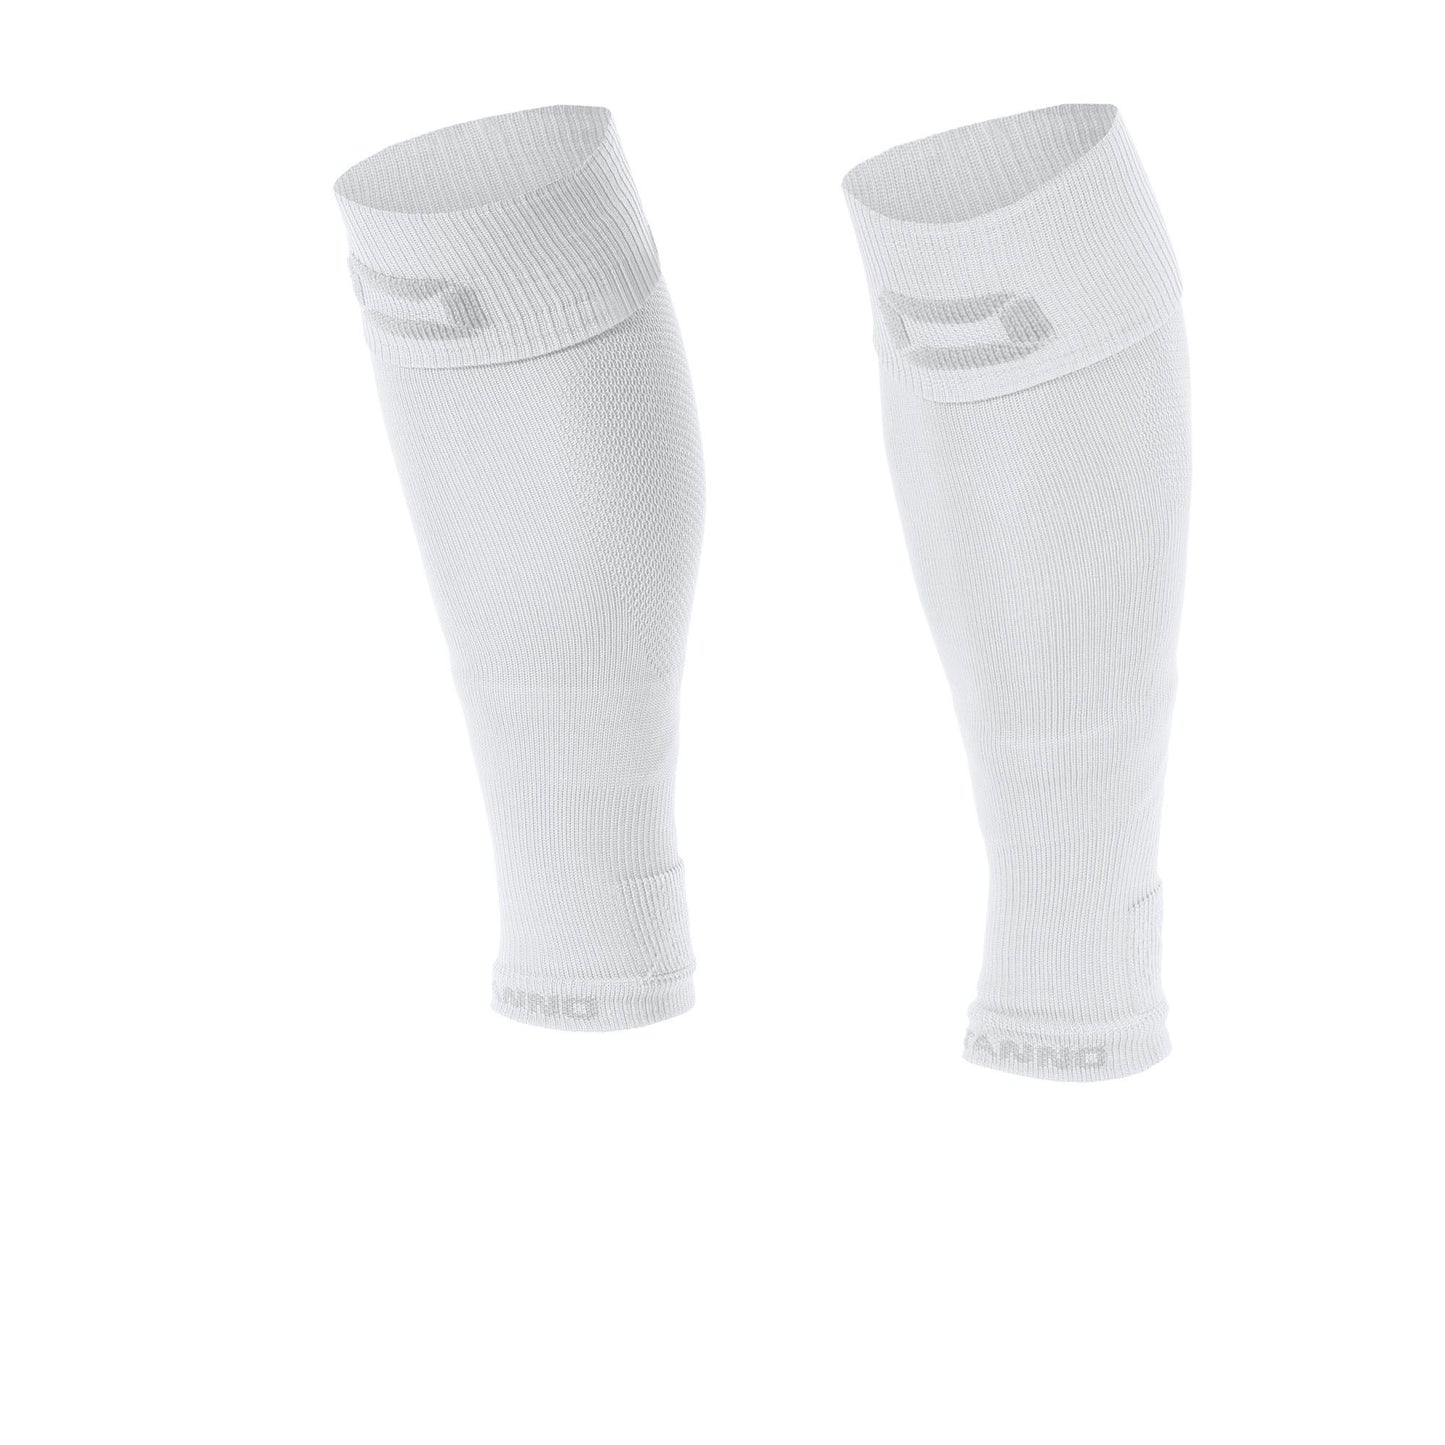 Stanno Move Footless Football Sock Sleeves Junior or Senior sizes